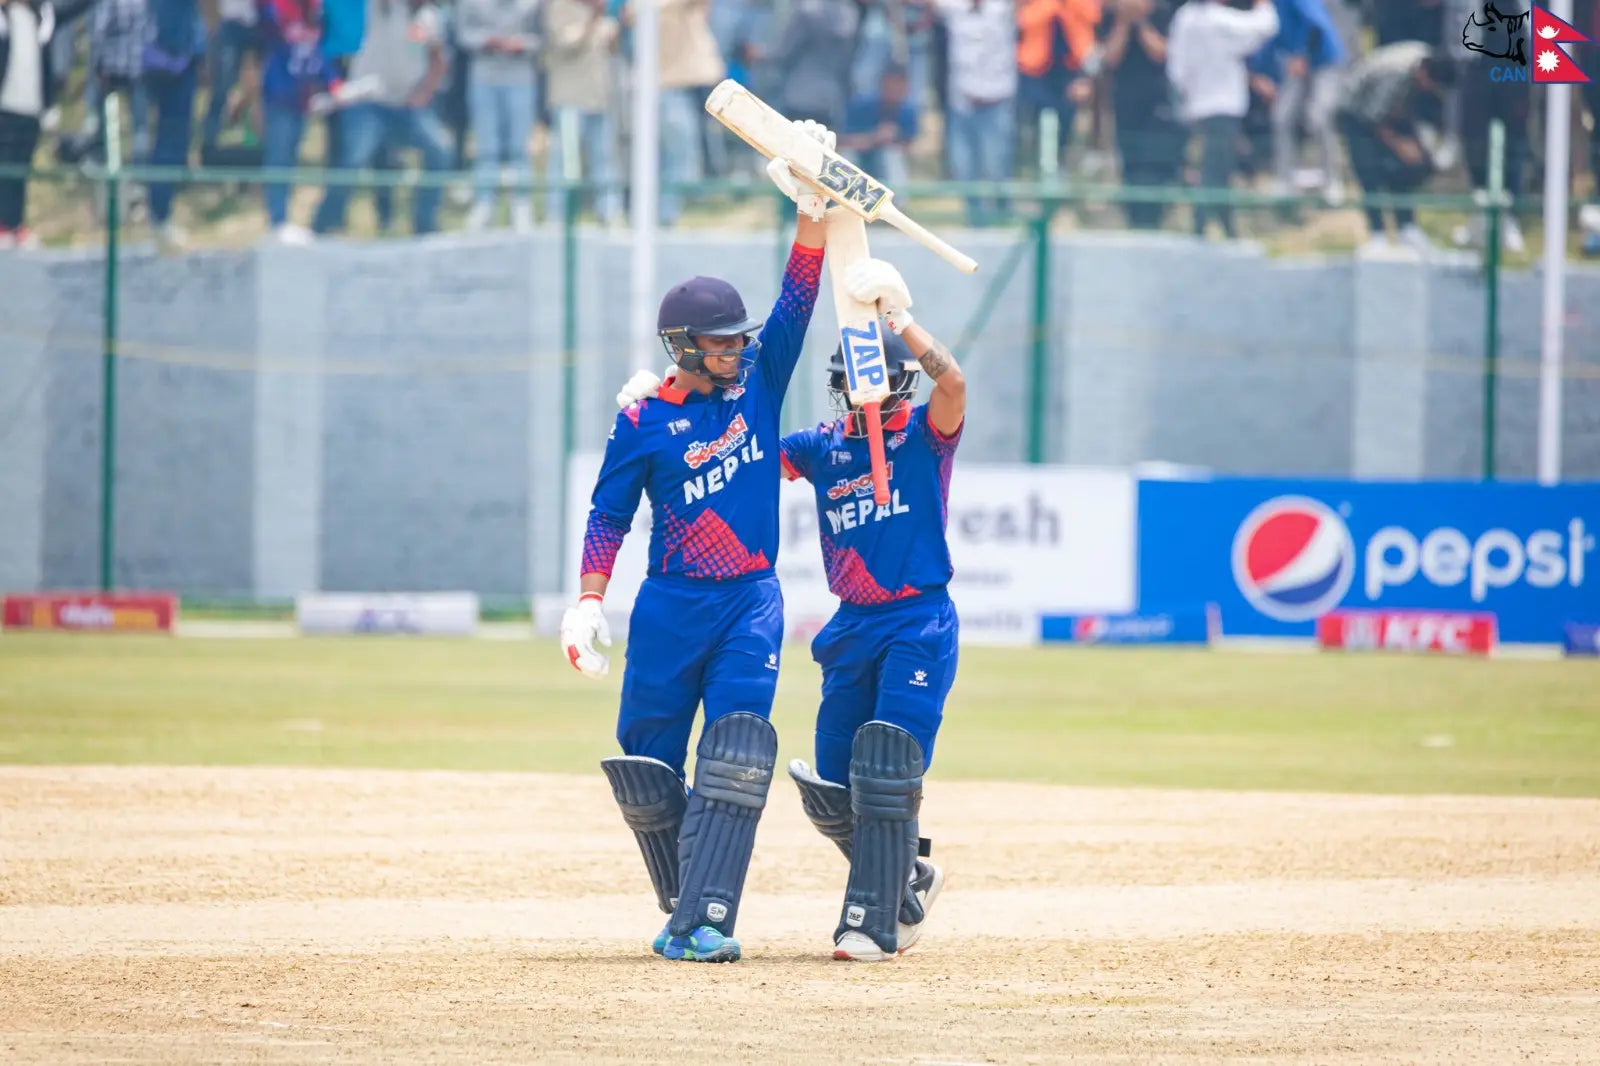 Kushal Malla celebrates with Rohit Paudel After scoring the fastest century in T20I Cricket